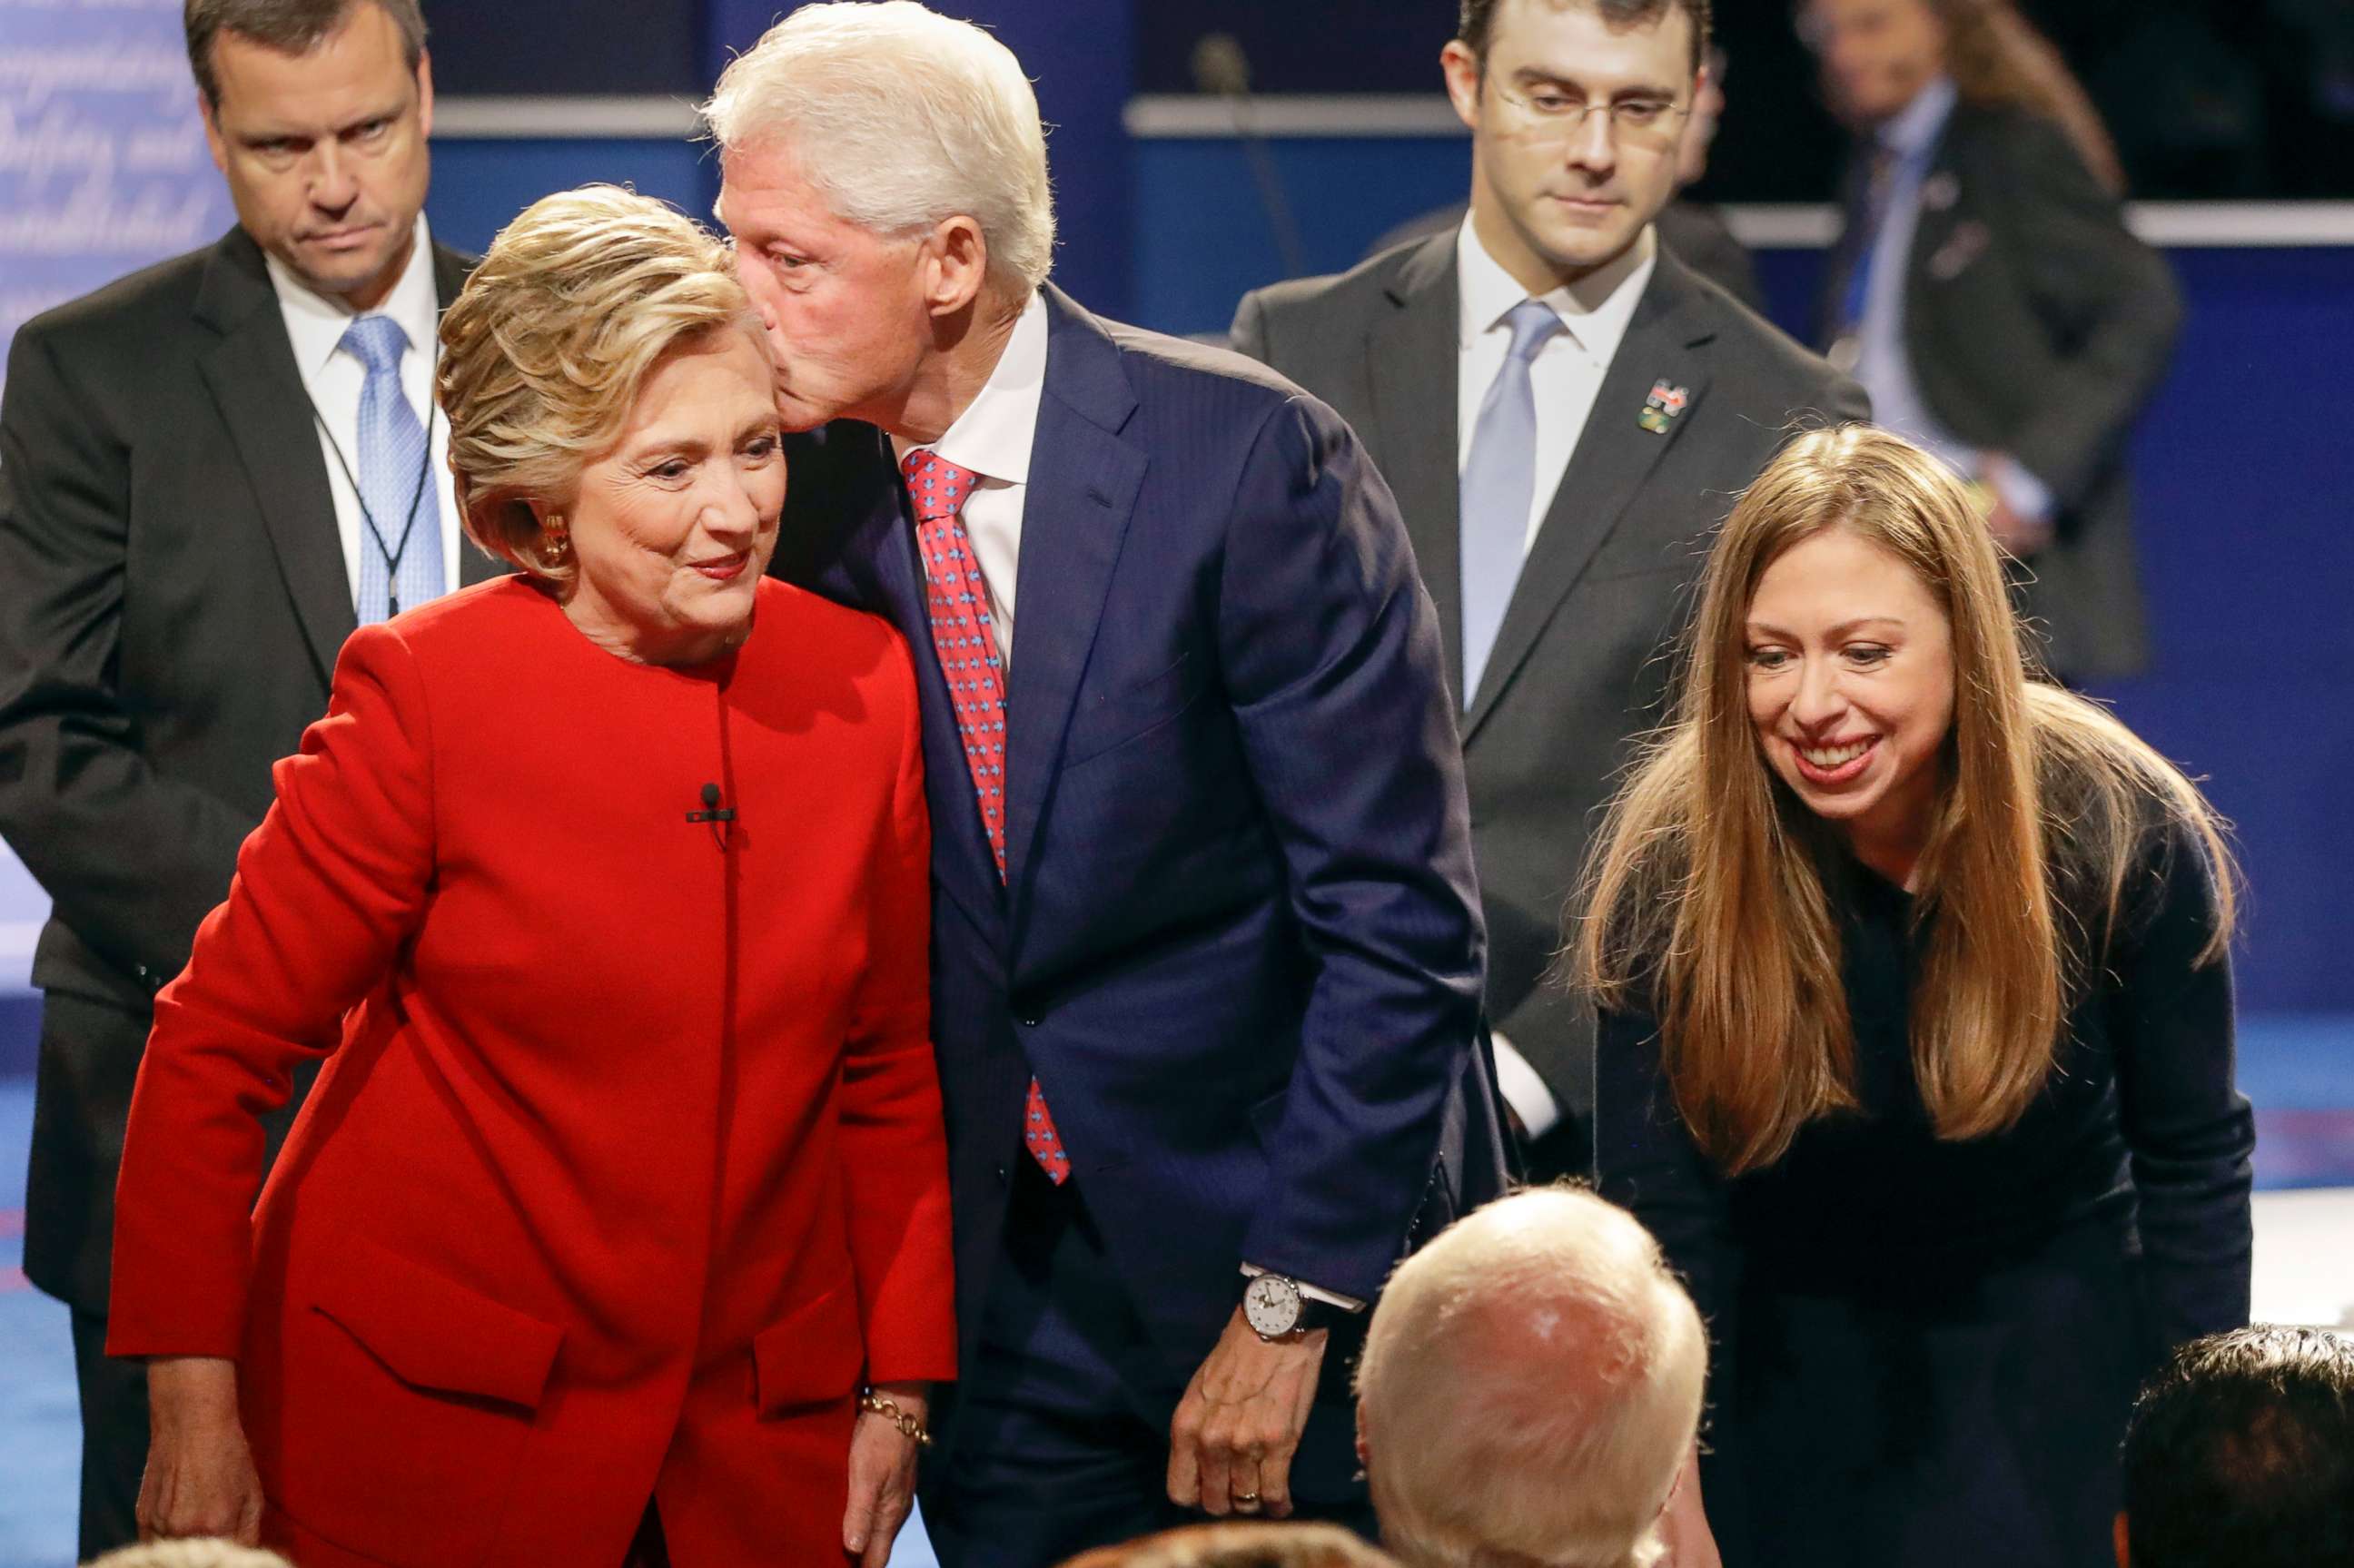 PHOTO: Former President Bill Clinton kisses Democratic presidential nominee Hillary Clinton as she and their daughter Chelsea Clinton greet supports during the presidential debate at Hofstra University in Hempstead, N.Y., Sept. 26, 2016.